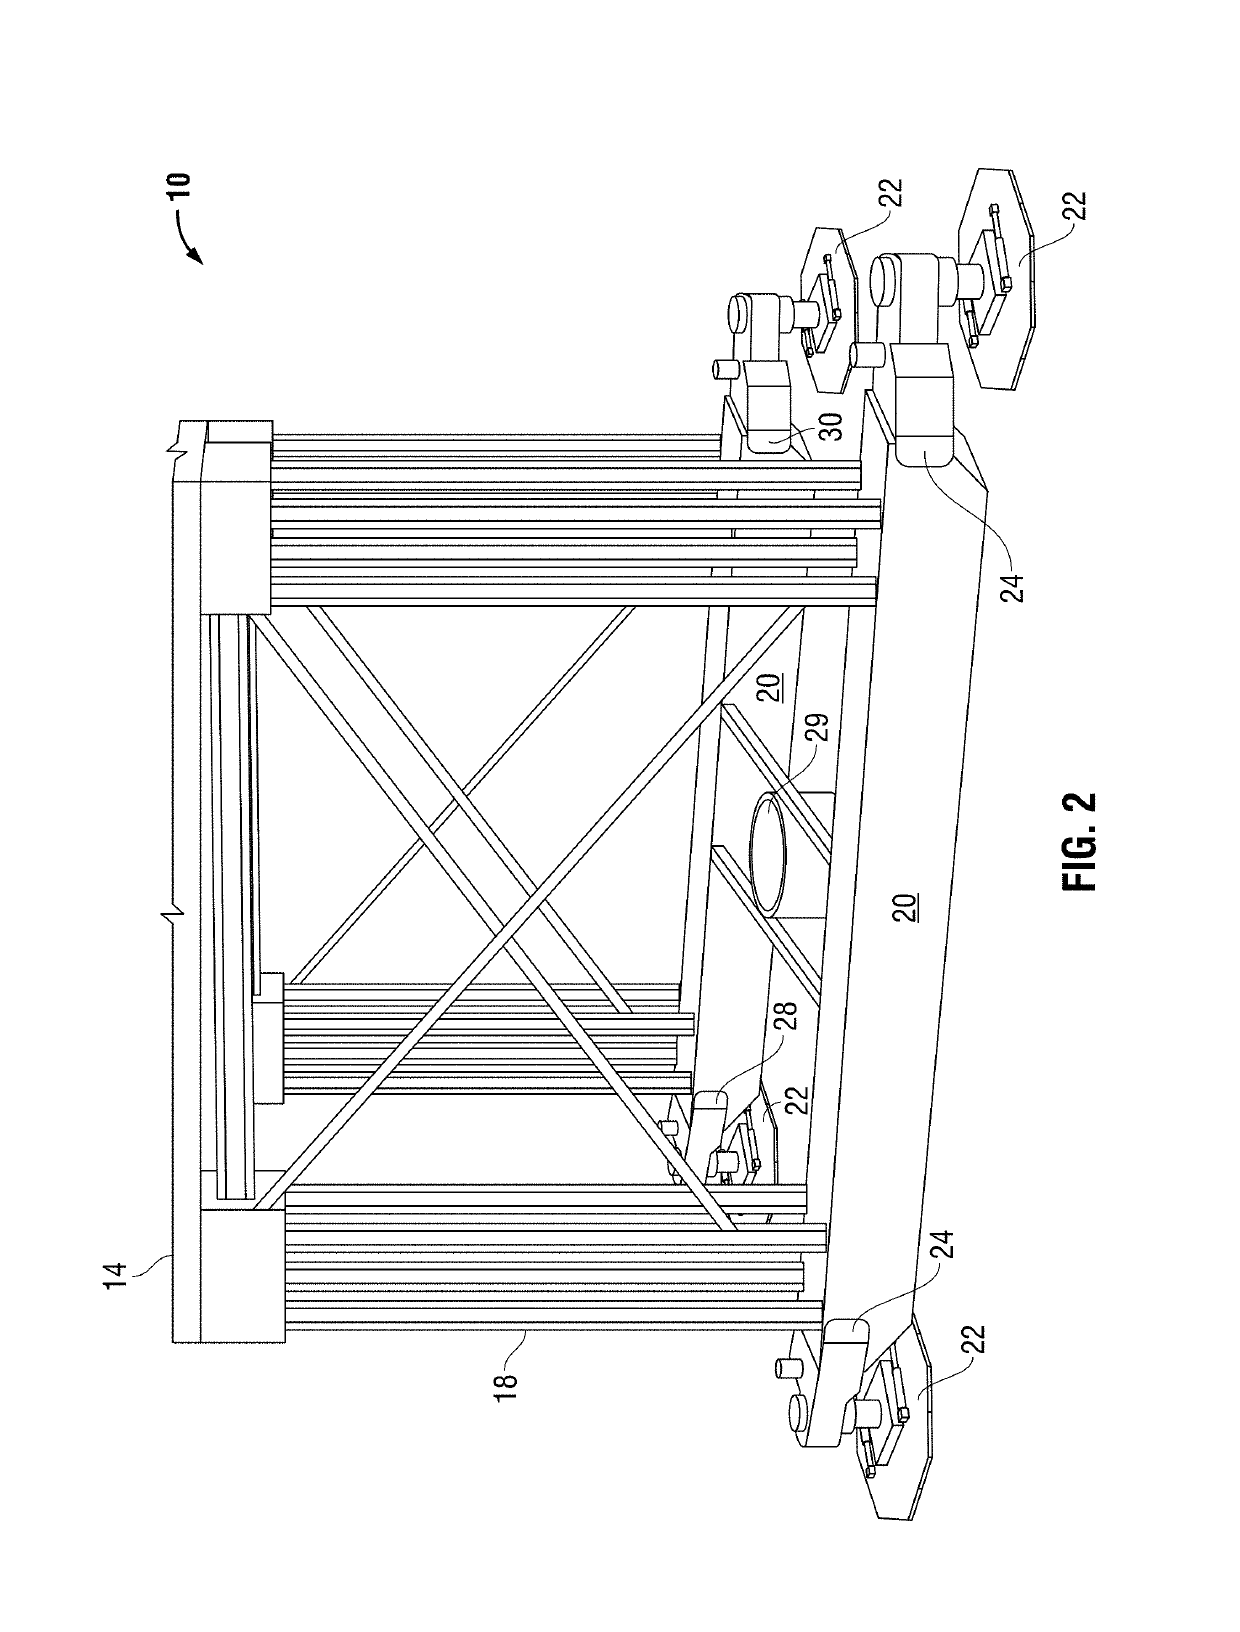 Method and system for positioning a drilling or other large structure using attached positioning shoes with individually addressable wireless vertical and rotational control